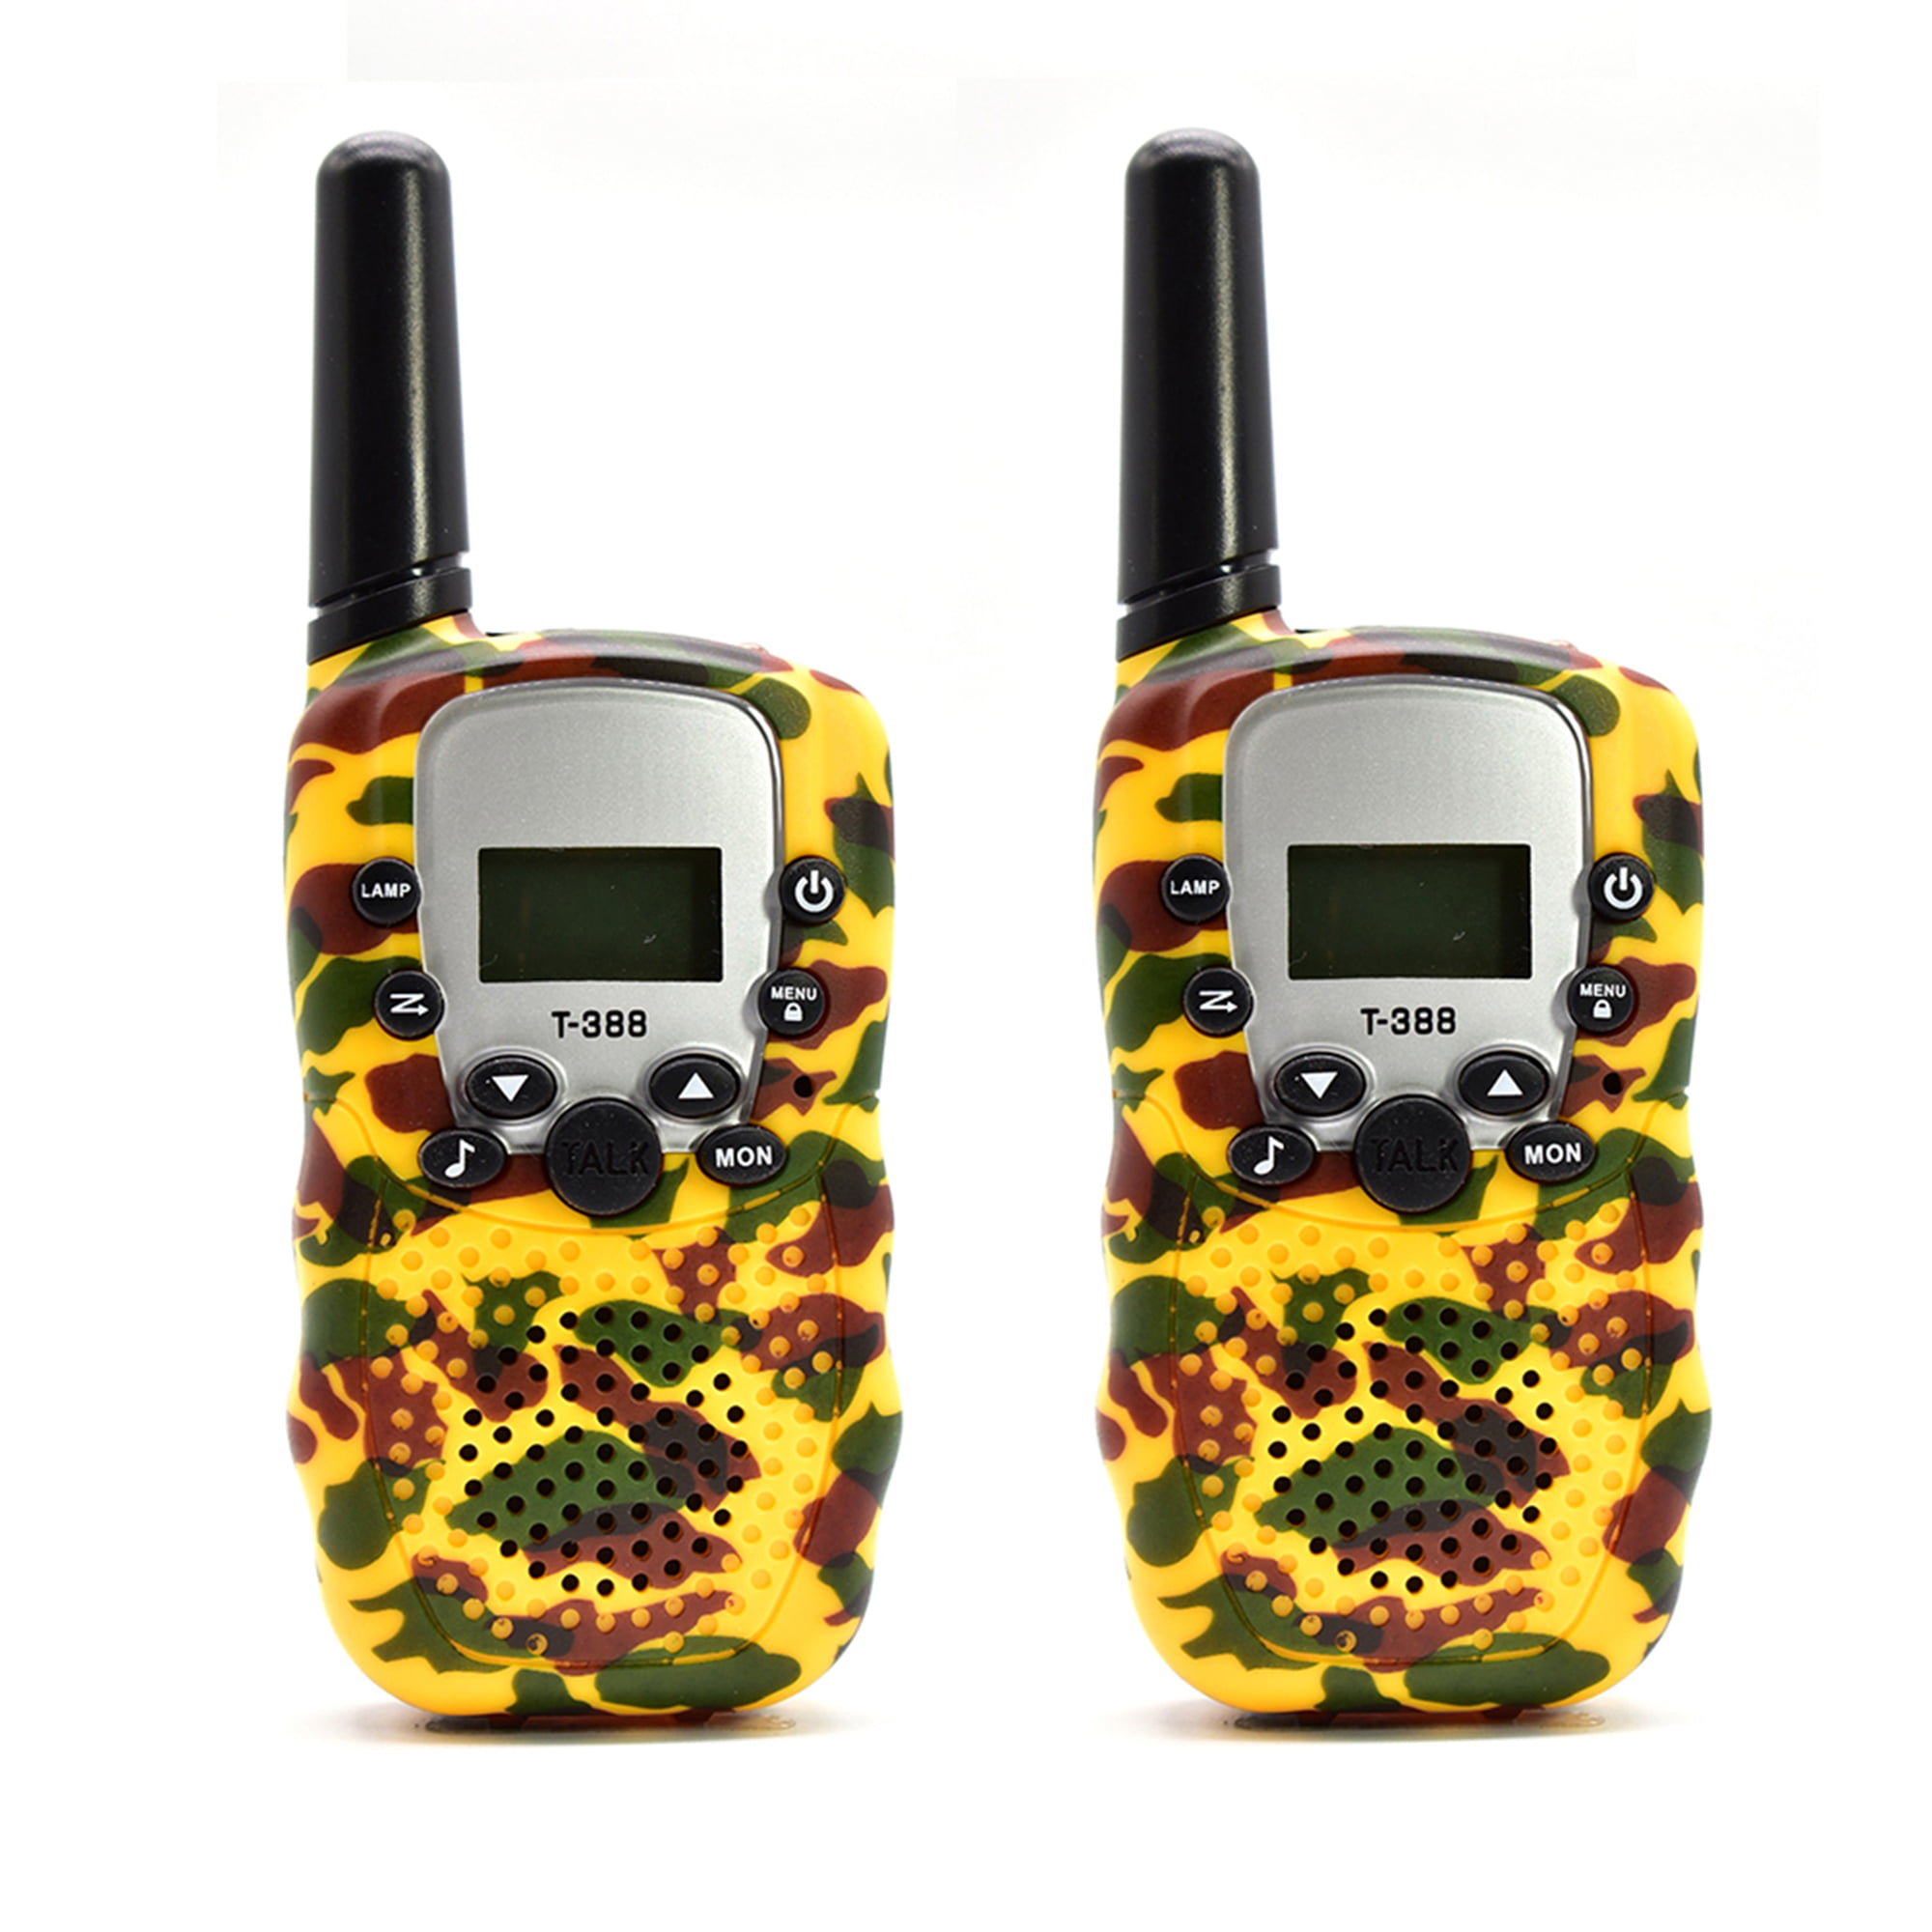 COUTEXYI Walkie Talkies for Kids, Long Range Walky Talky 